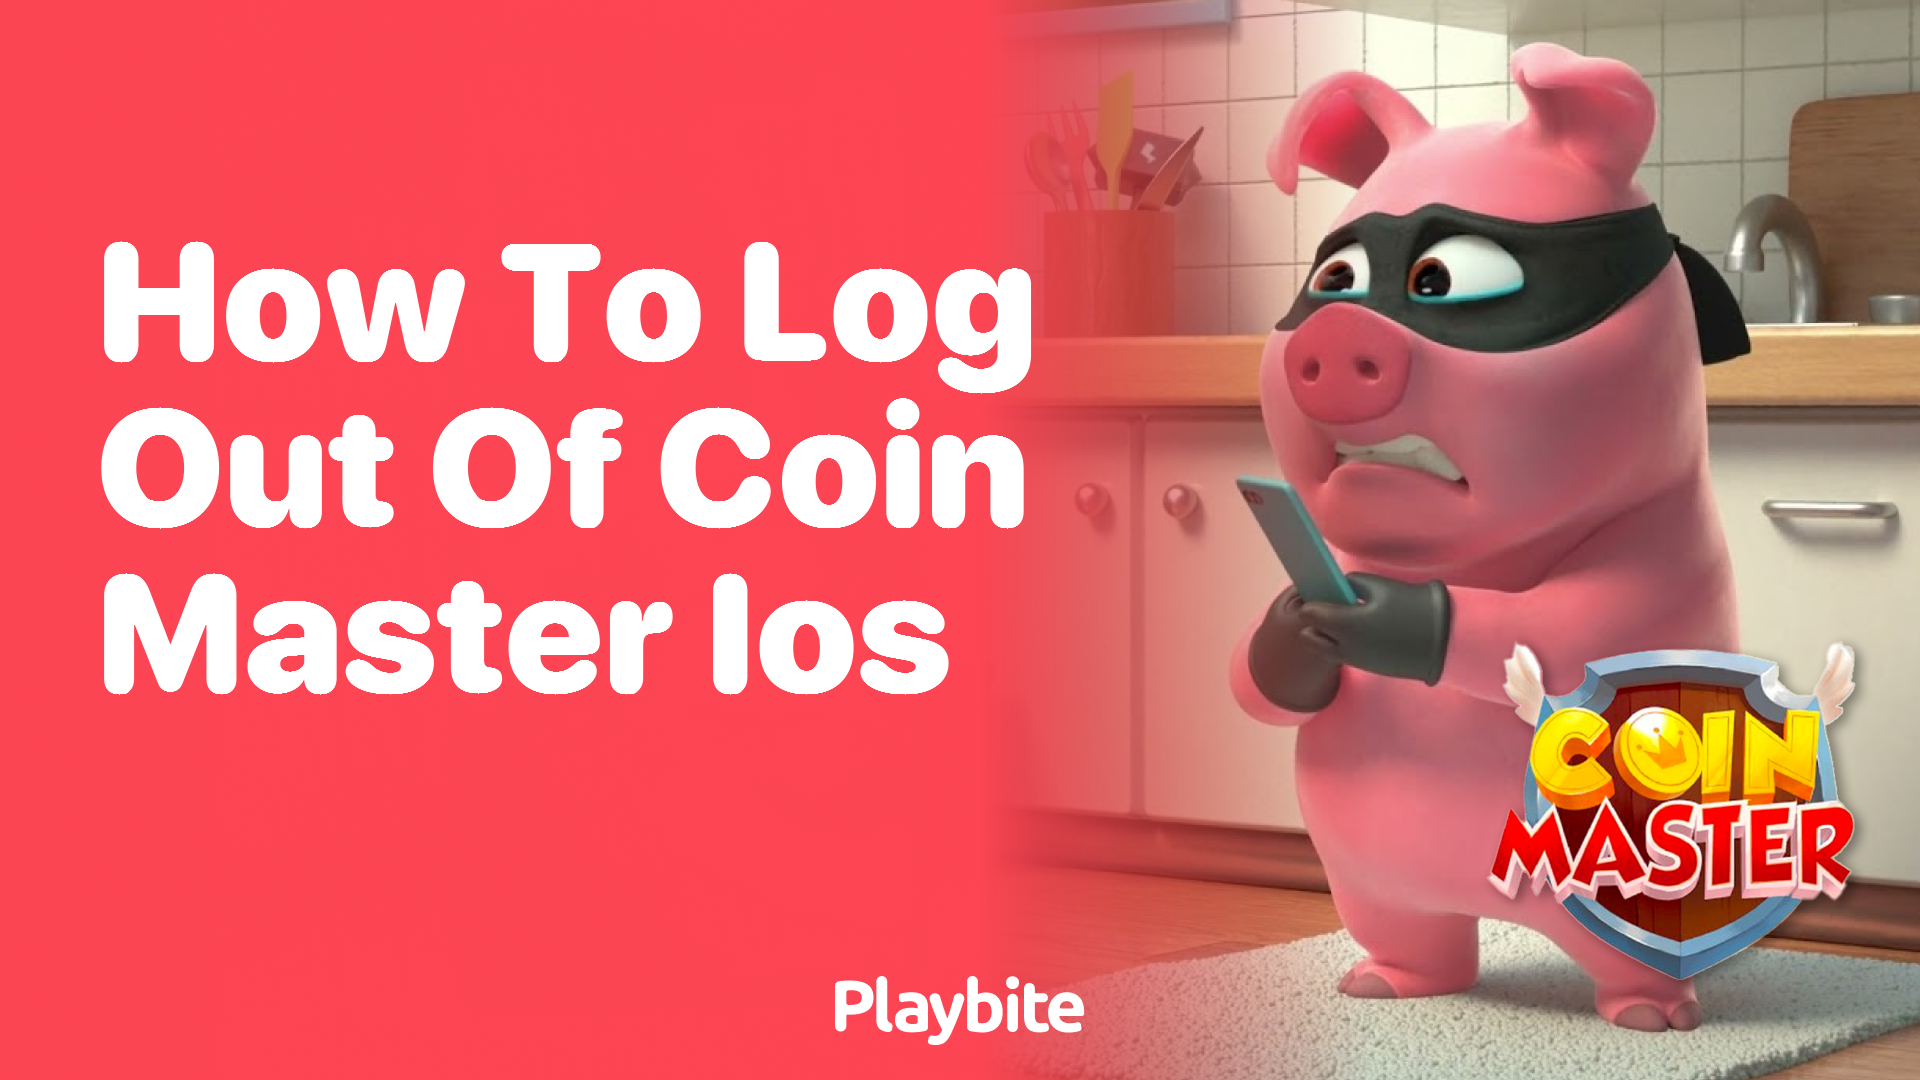 How to Log Out of Coin Master on iOS: A Simple Guide